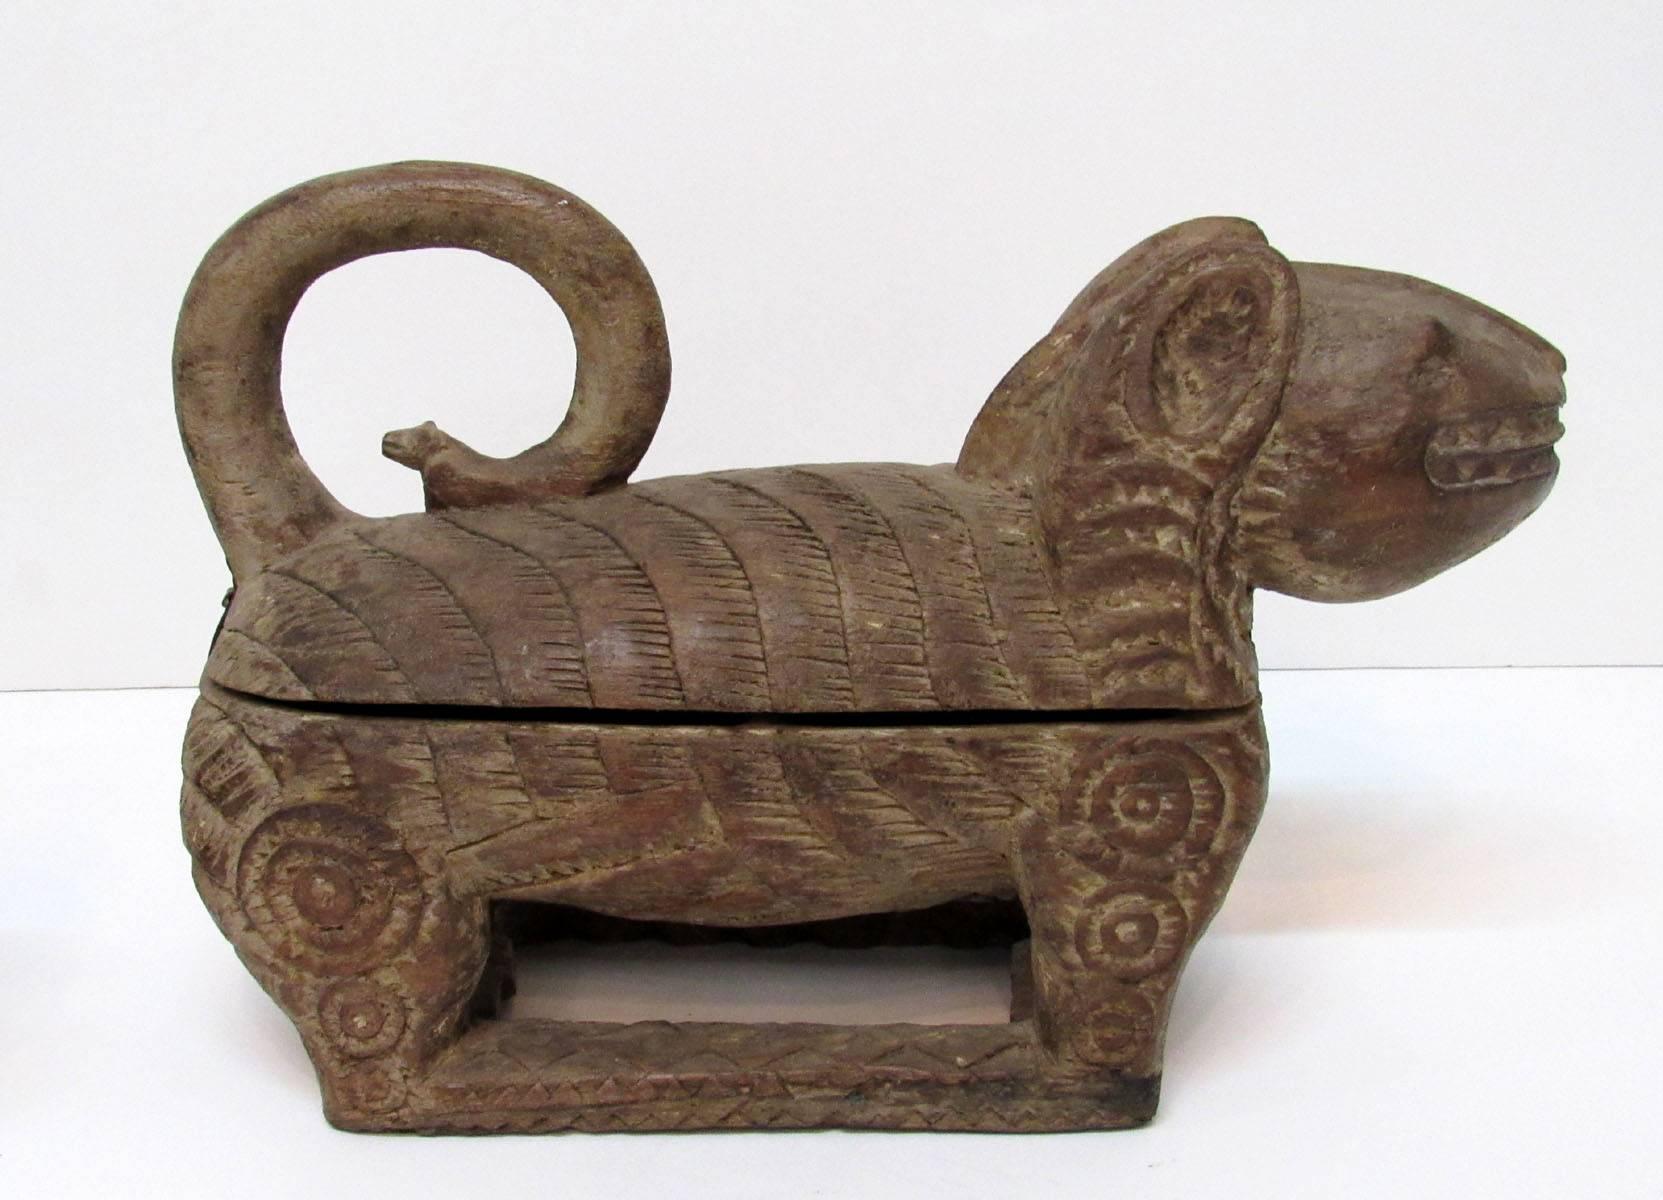 Near pair of early 19th century hand-carved wooden boxes in the shape of animals, most likely monkeys, purchased in Siam. One is larger than the other, the smaller is 11½